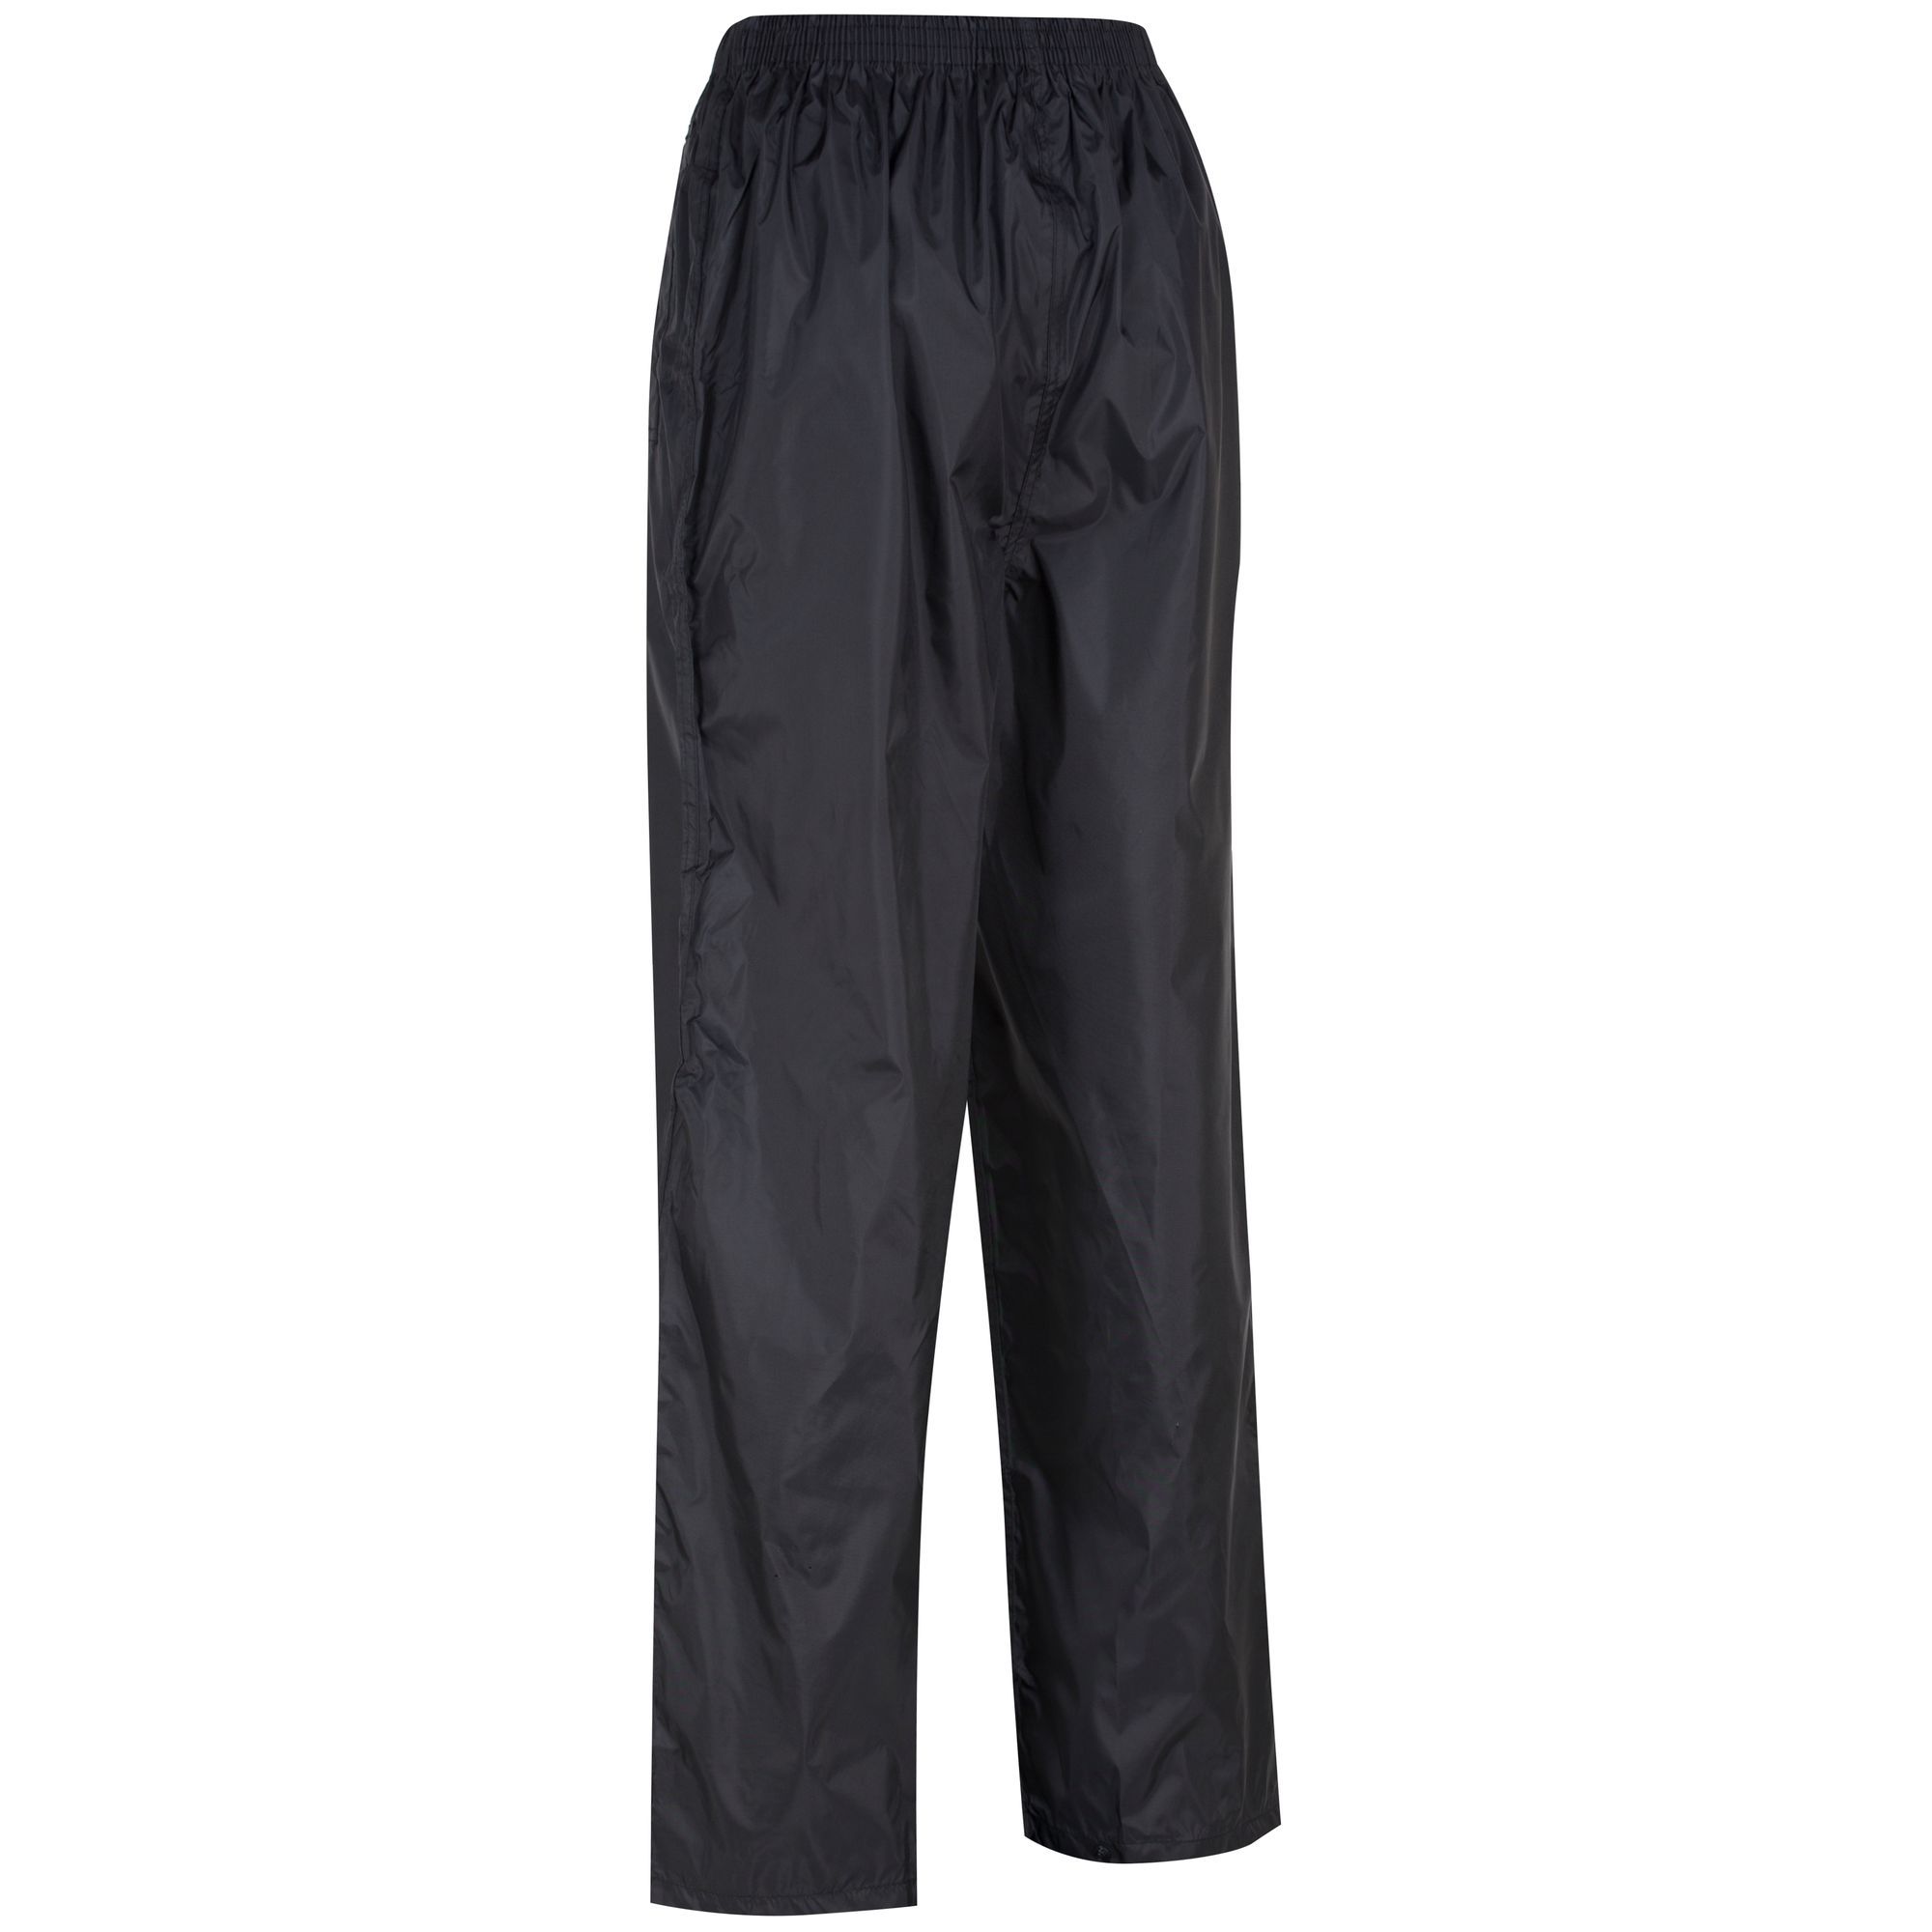 The womens Pack-it is an unlined packable overtrouser. Its your emergency wet-weather legwear built on over 30 years experience in outdoor clothing. The Isolite fabric technology provides lightweight, waterproof, breathable and wind-resistant protection. Keep them in the handy stuff sack and stow them in daypacks, backpacks, car boots, desk drawers, kitchen cupboards or wherever suits. 100% Polyester. Regatta Womens Overtrousers Sizing (Waist Approx): S (26-28in/66-71cm), M (30-32in/76-81cm), L (34-36in/86-92cm), XL (38in/97cm).